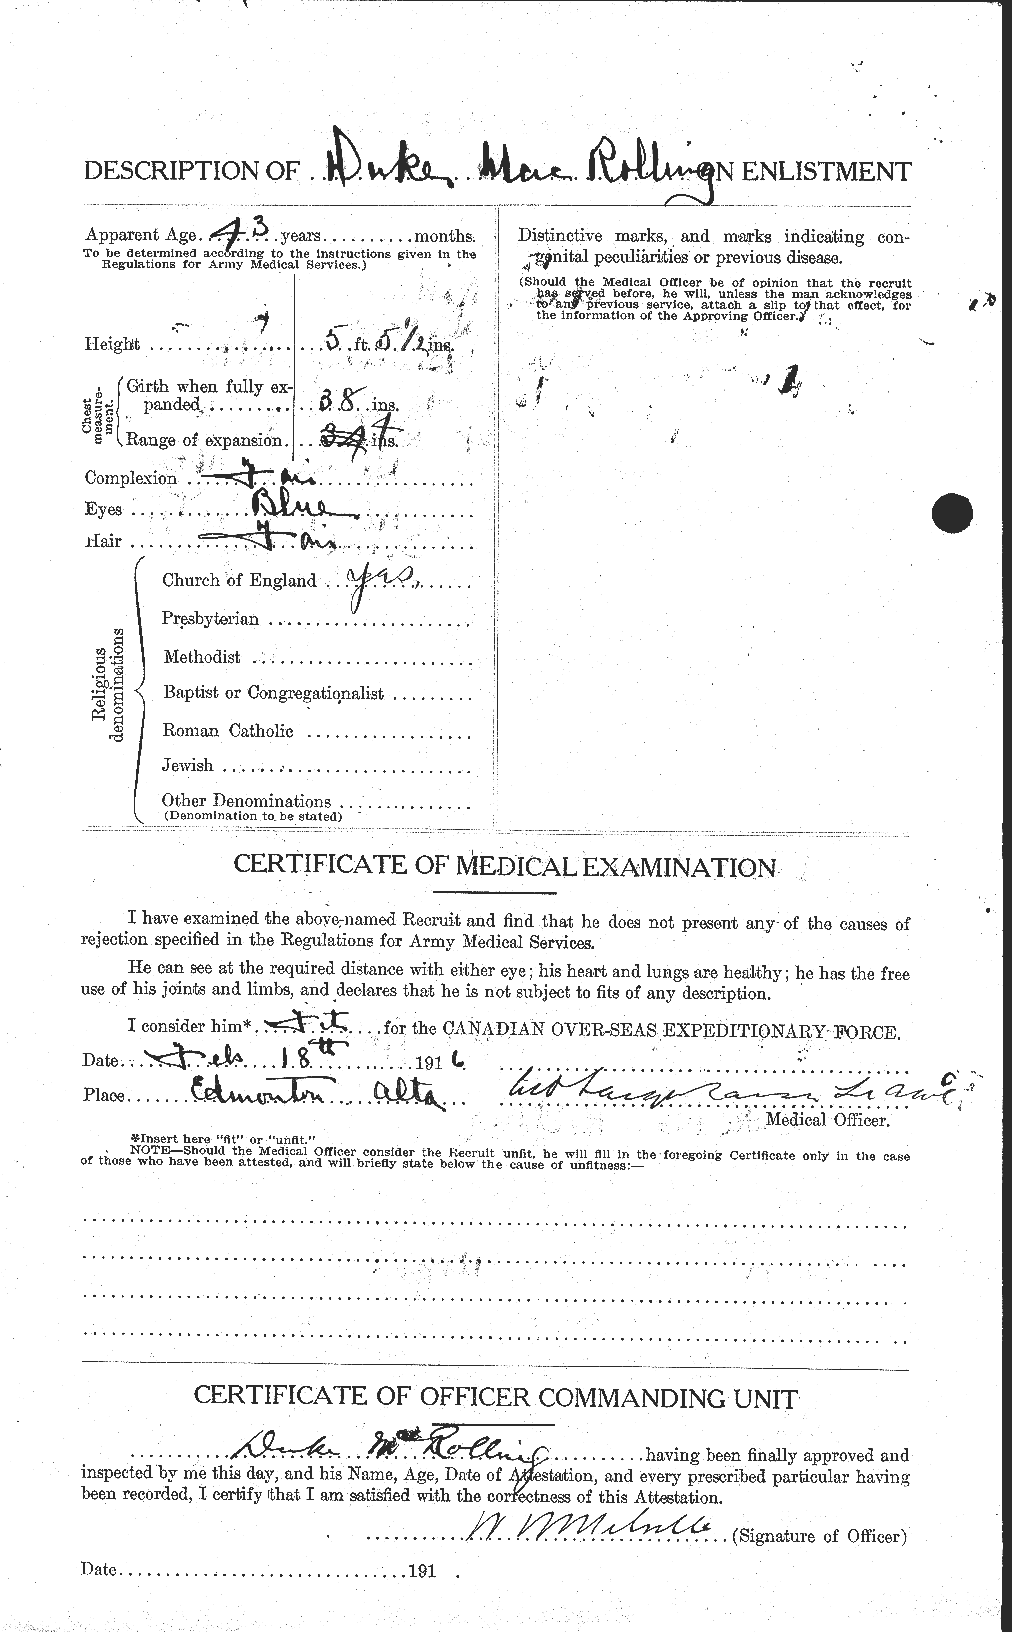 Personnel Records of the First World War - CEF 544760b